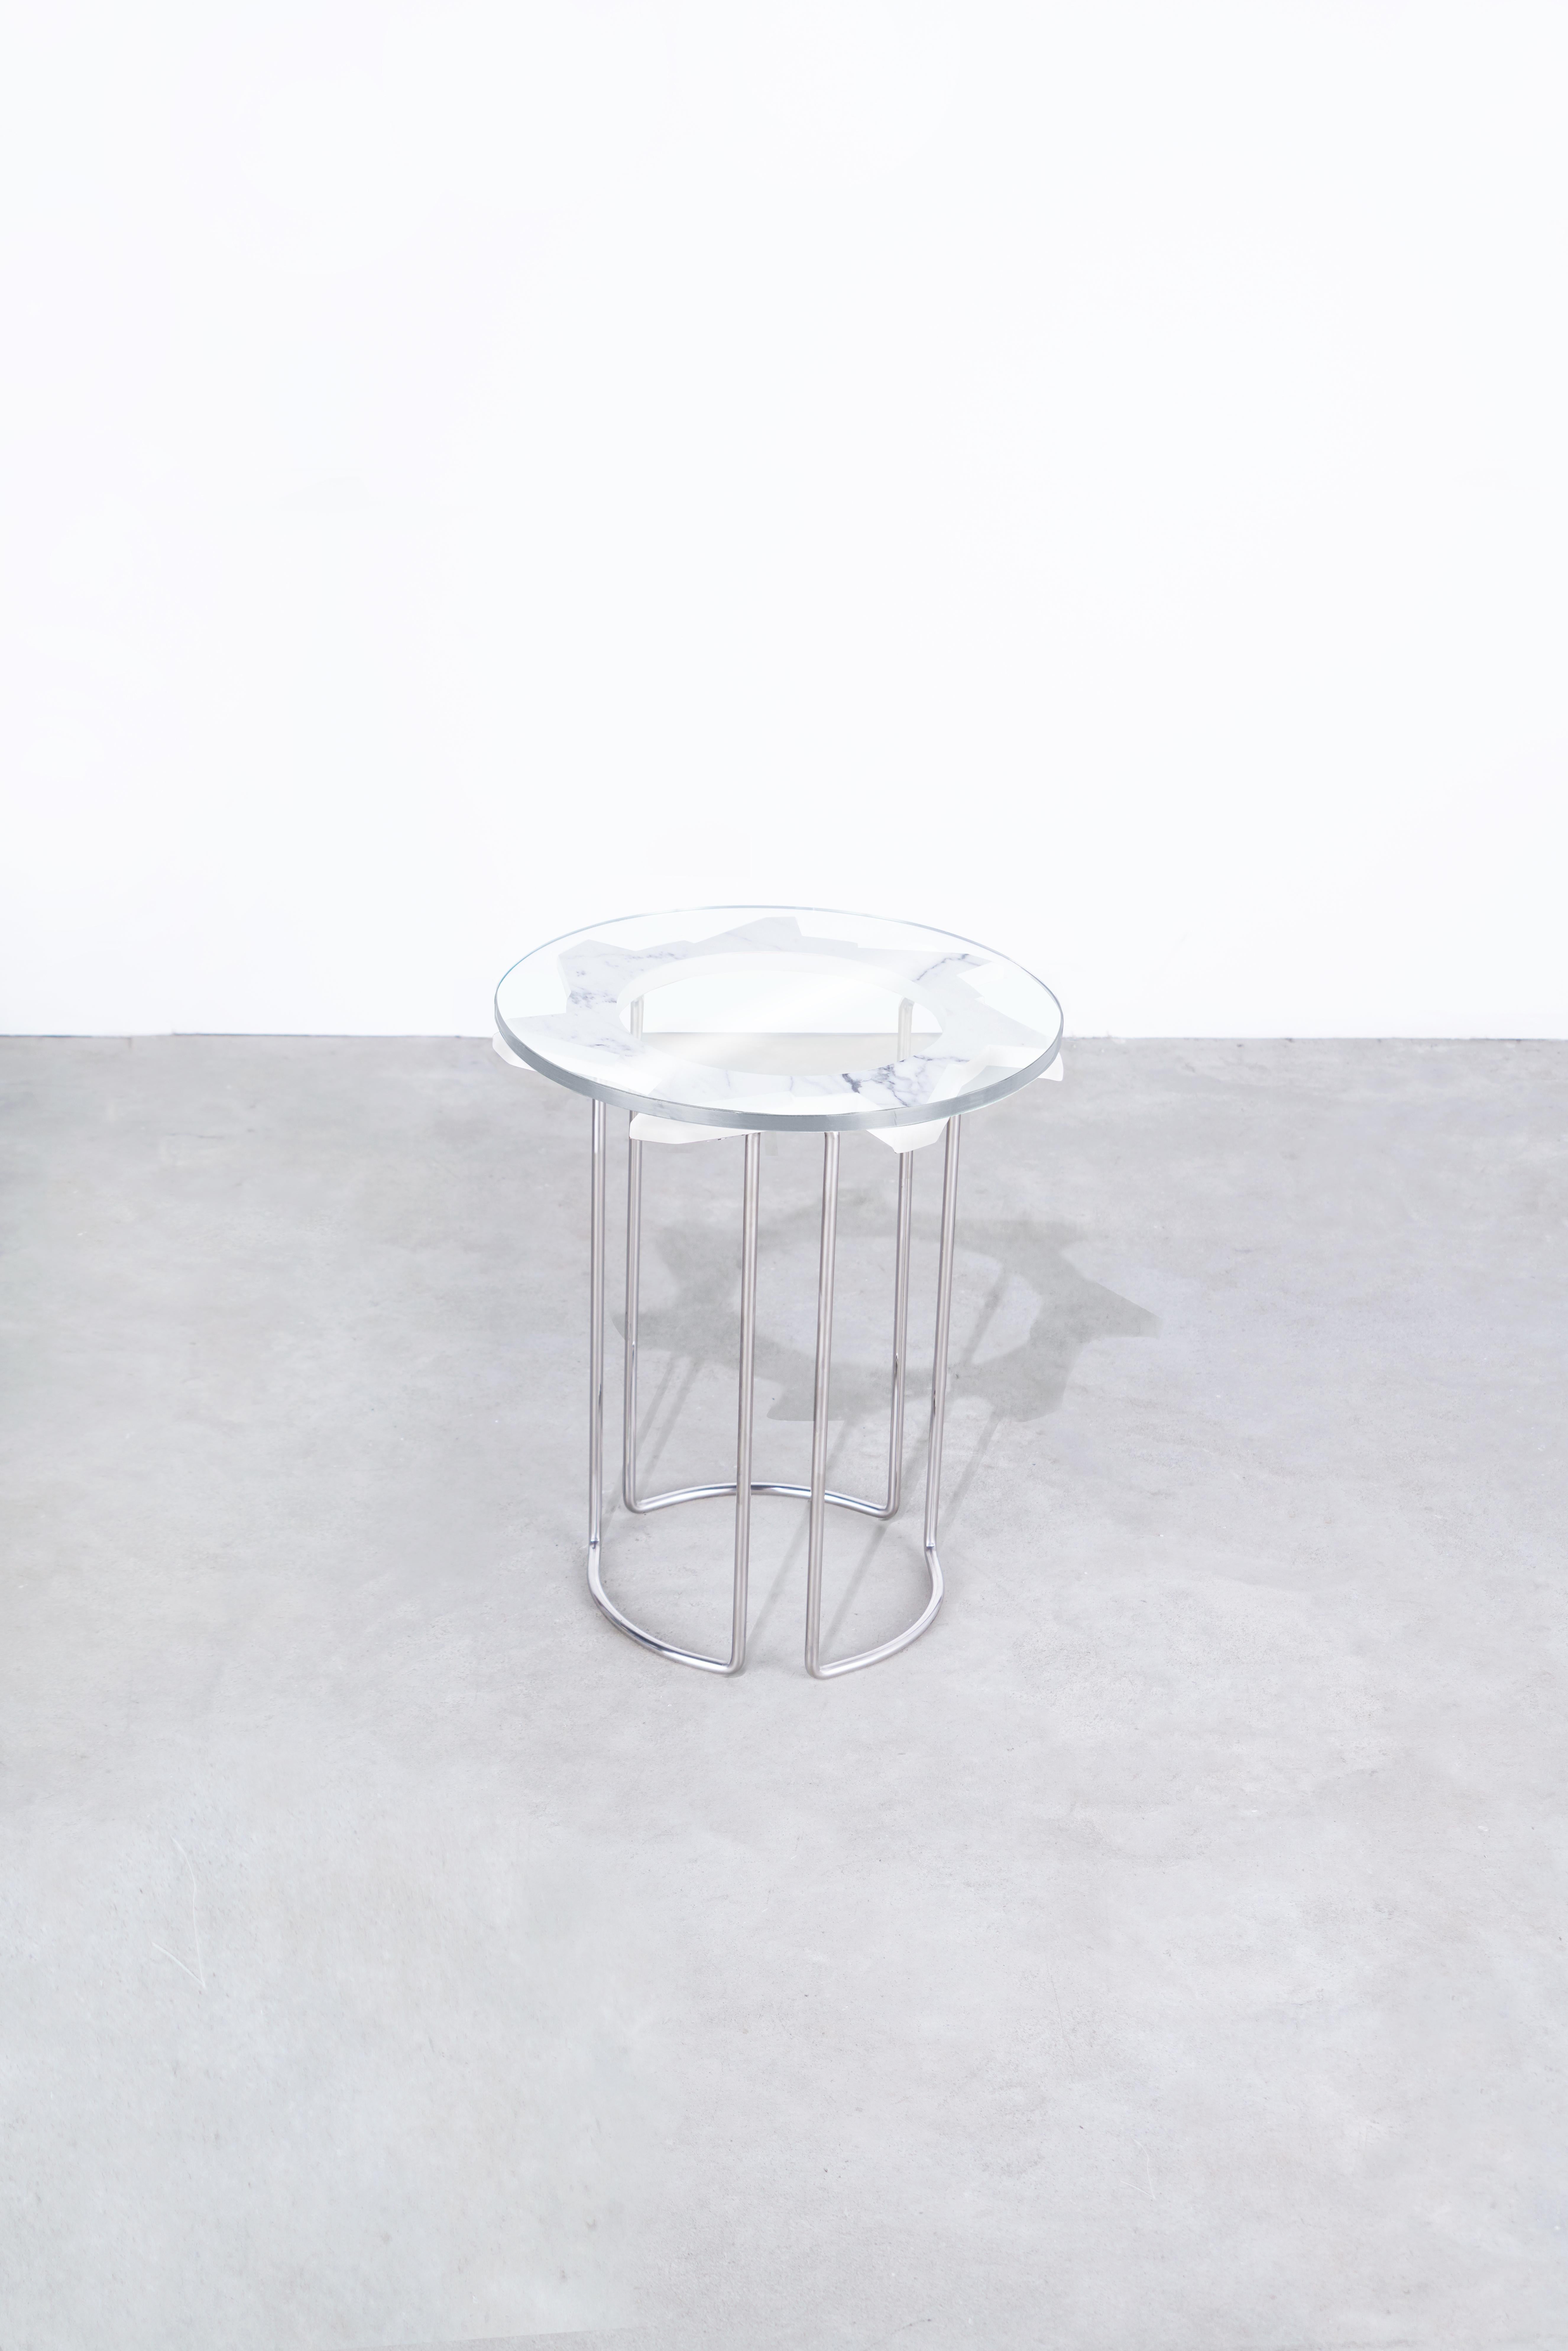 Water jet cut, hand-beveled + hand-polished carrara marble table, with tempered glass top. 
Hand-formed + hand-polished stainless steel legs, welded into one continuous table base. 
Starphire glass top. 
Position alone, or nest with another